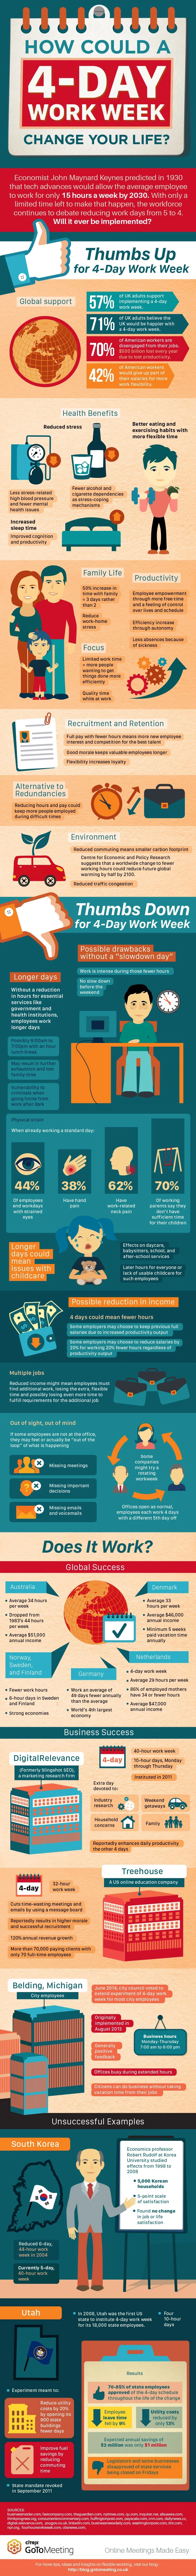 How could a four-day week change your life? [infographic]